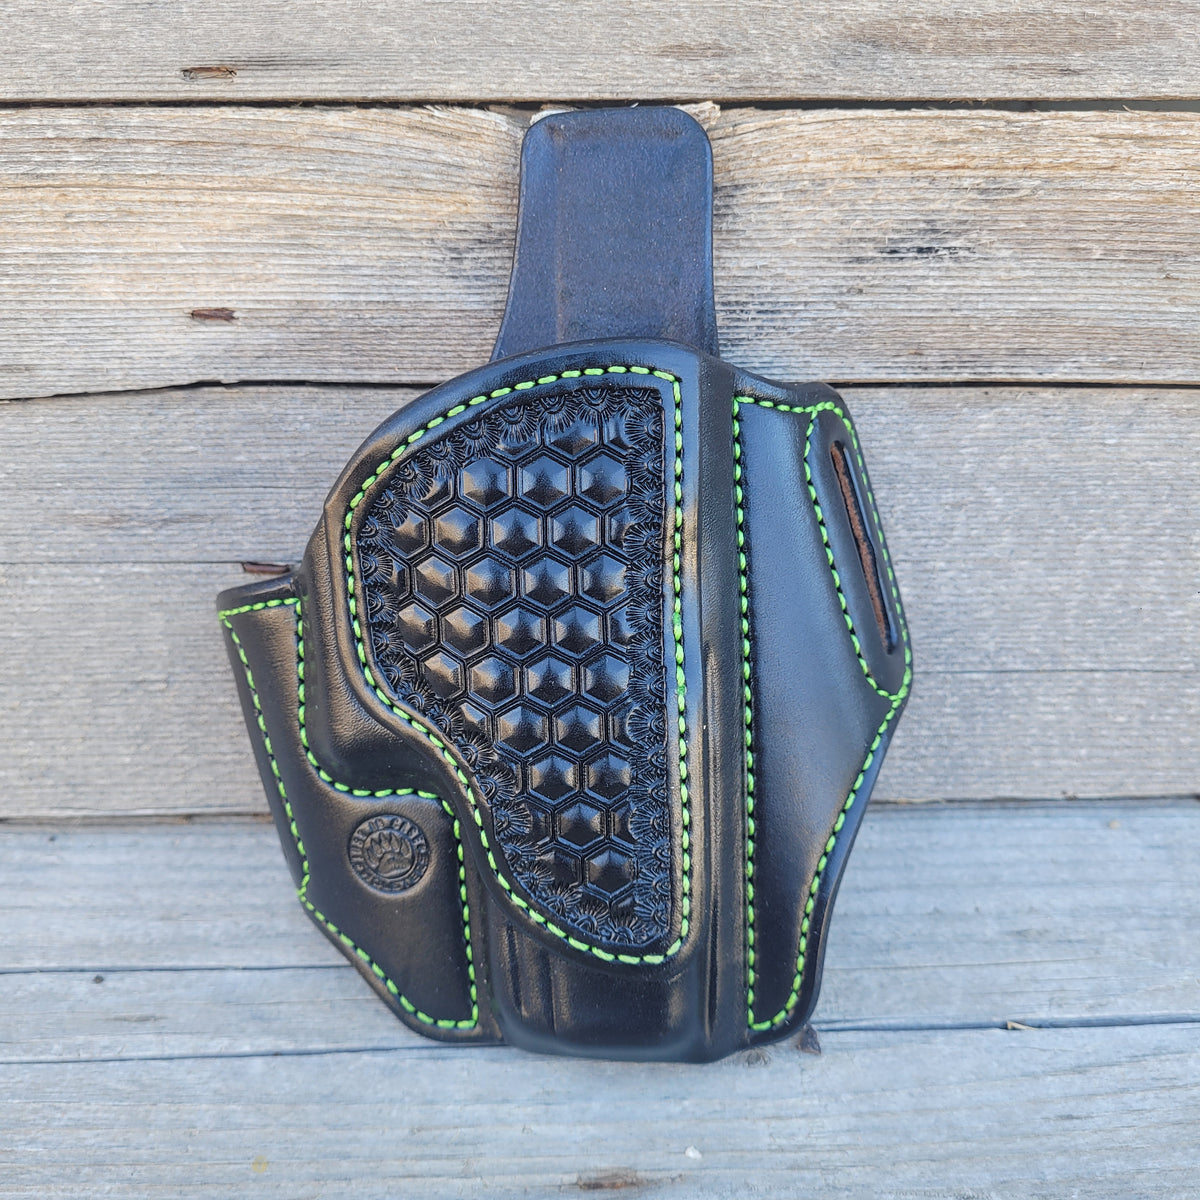 Glock 19/23 Classic Holster All Black, Zombie Green Stitching, Partial Hex Stamp